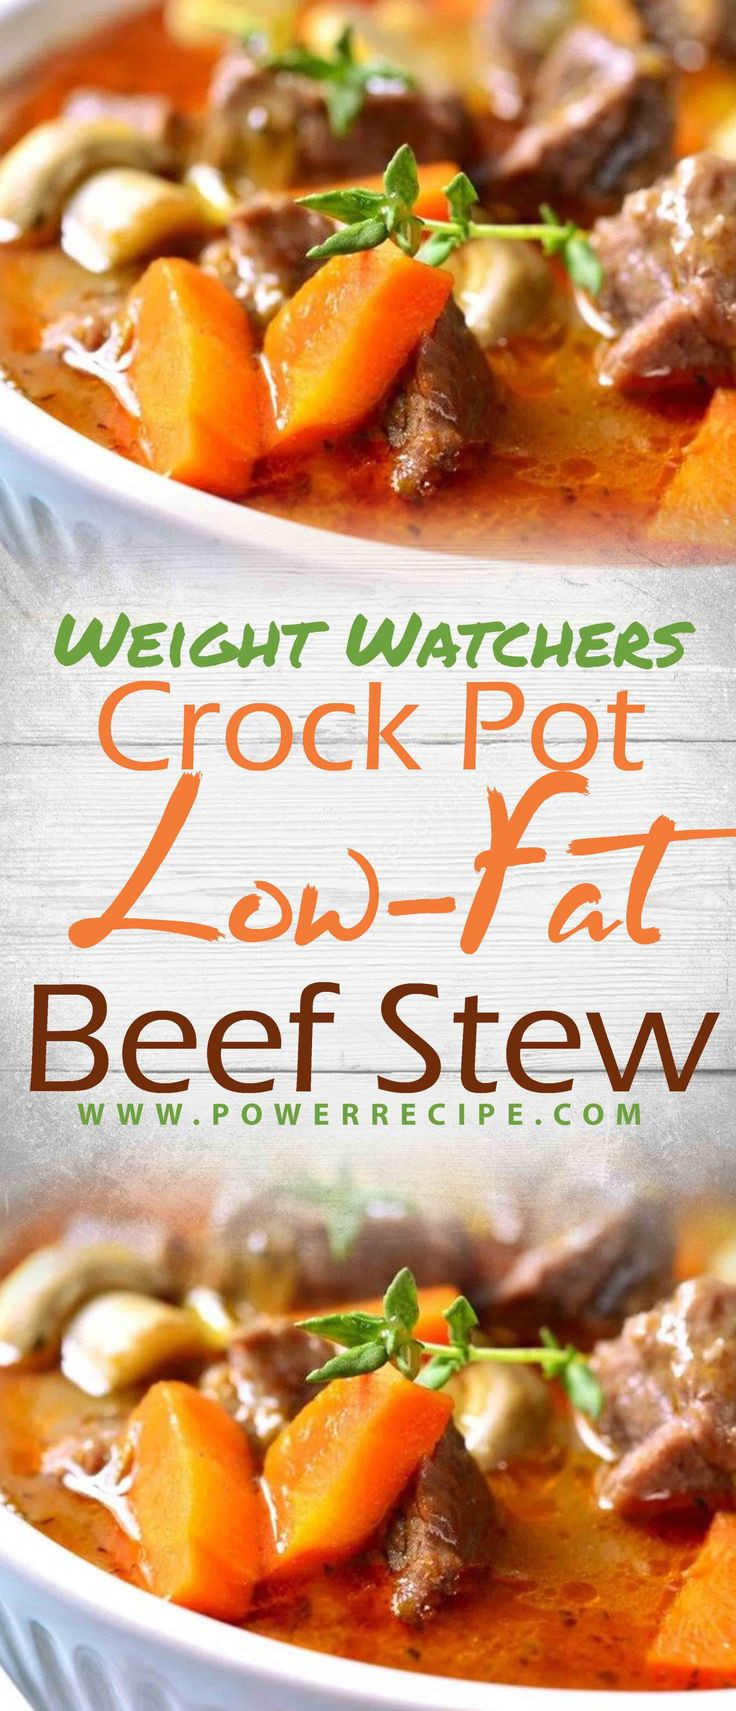 Low Fat Beef Recipes
 Crock Pot Low Fat Beef Stew – All about Your Power Recipes